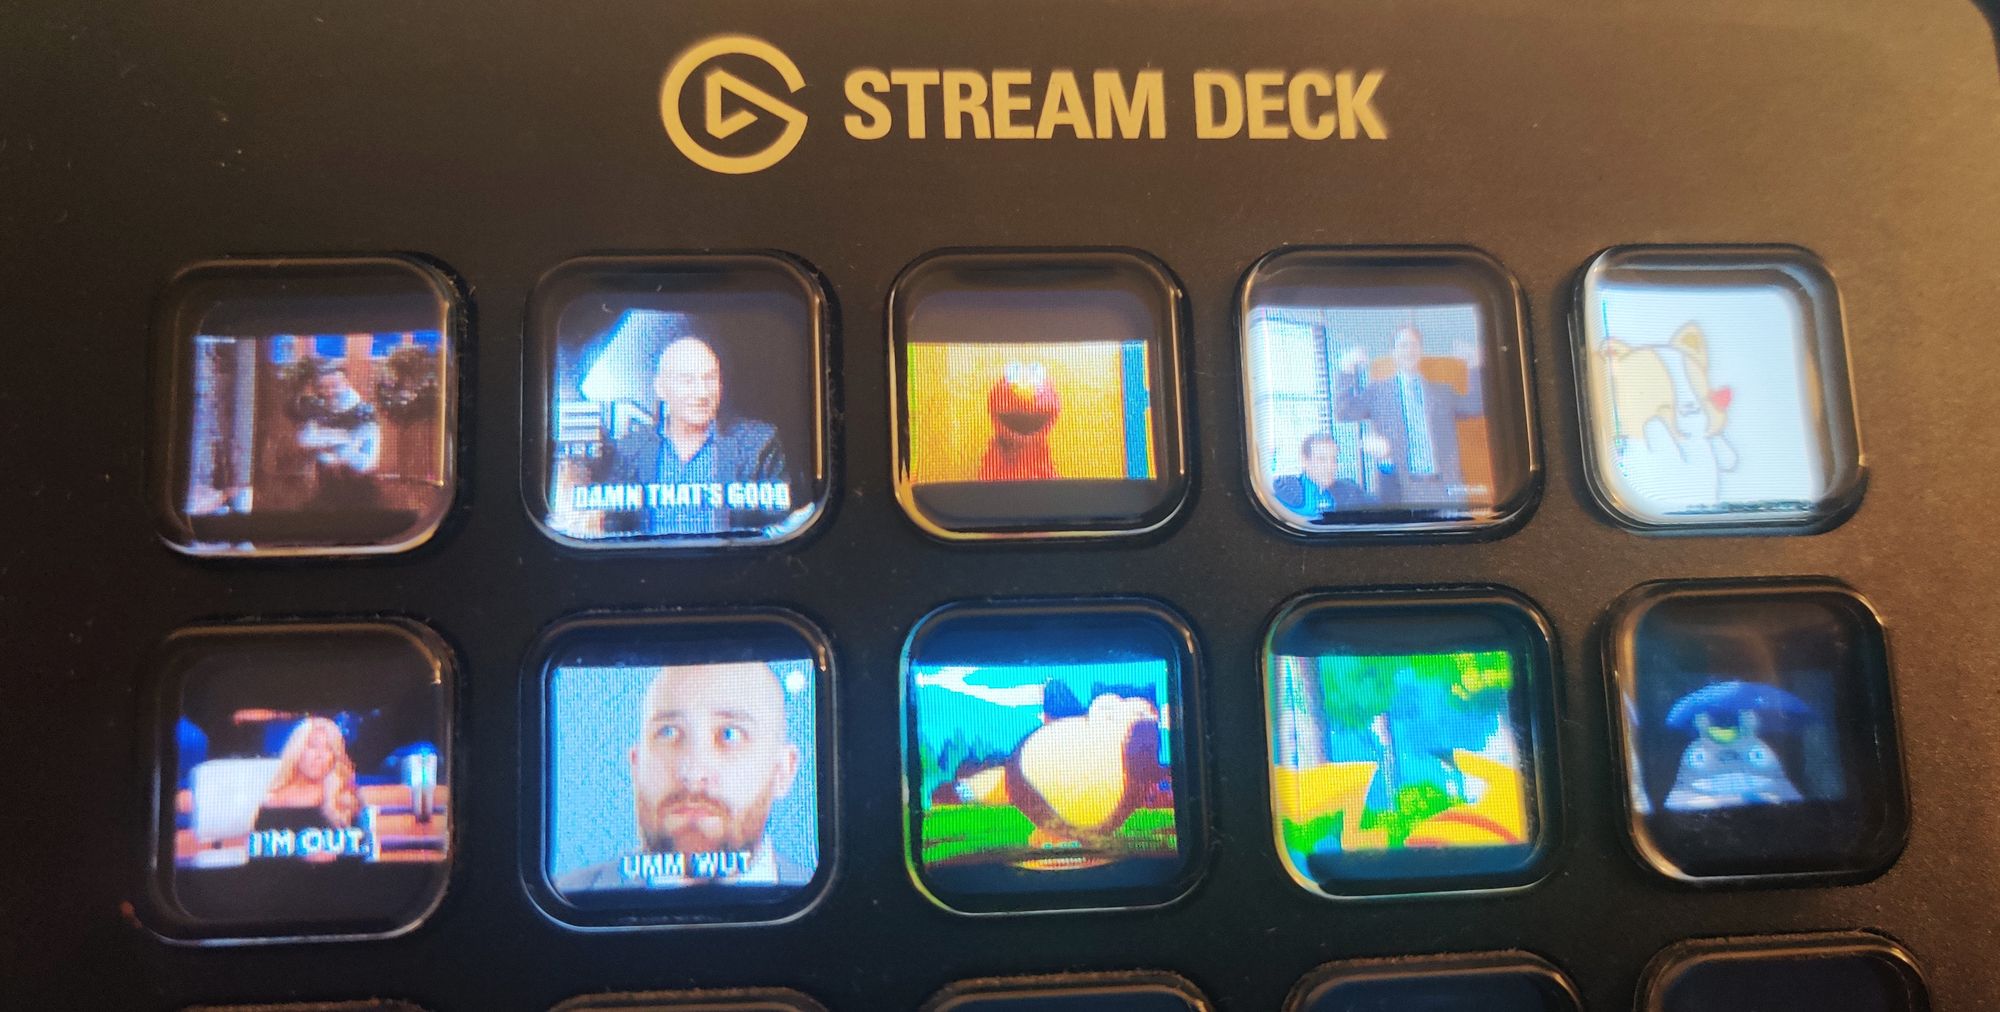 Stream Deck with two rows of gifs in button screens